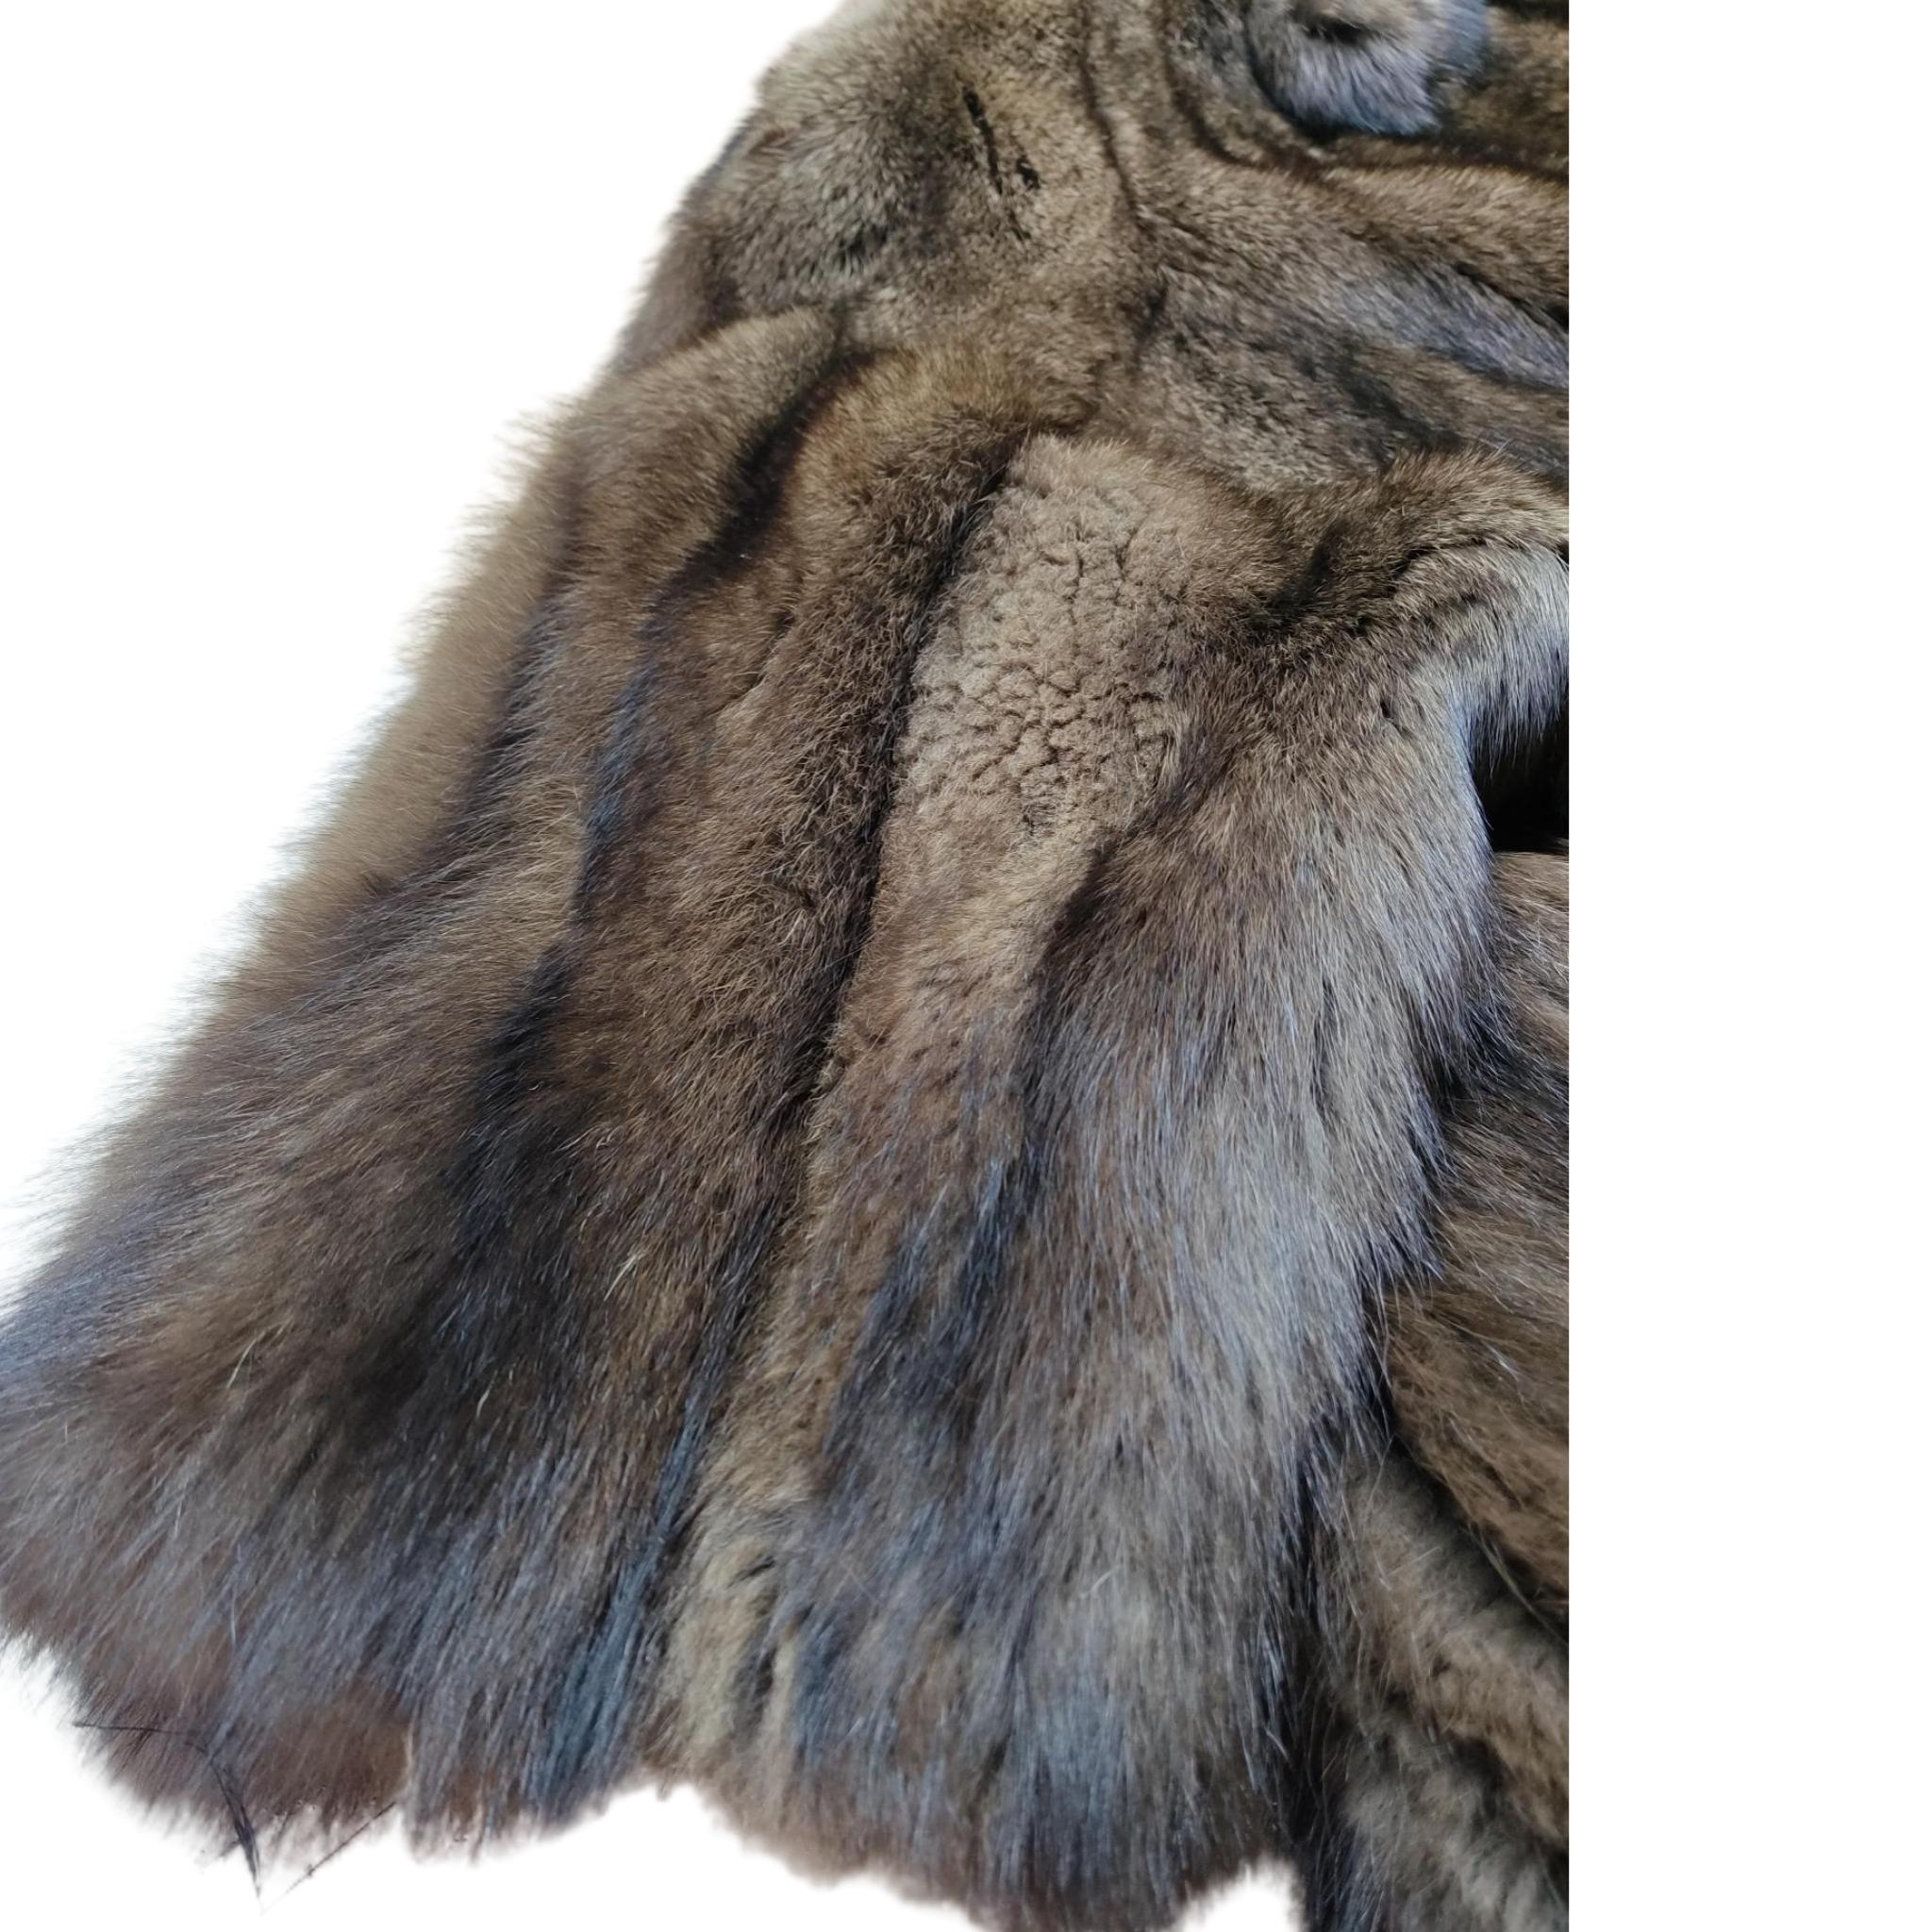 PRODUCT DESCRIPTION:

Brand new Big Tall  Men's Fisher sable fur coat jacket size 2 XL
**** exclusive Italian dressed skins 

Condition: Brand New

Closure: Buttons

Color: Tortora

Material: exclusive fisher sable 

Garment type: Coat

Sleeves: